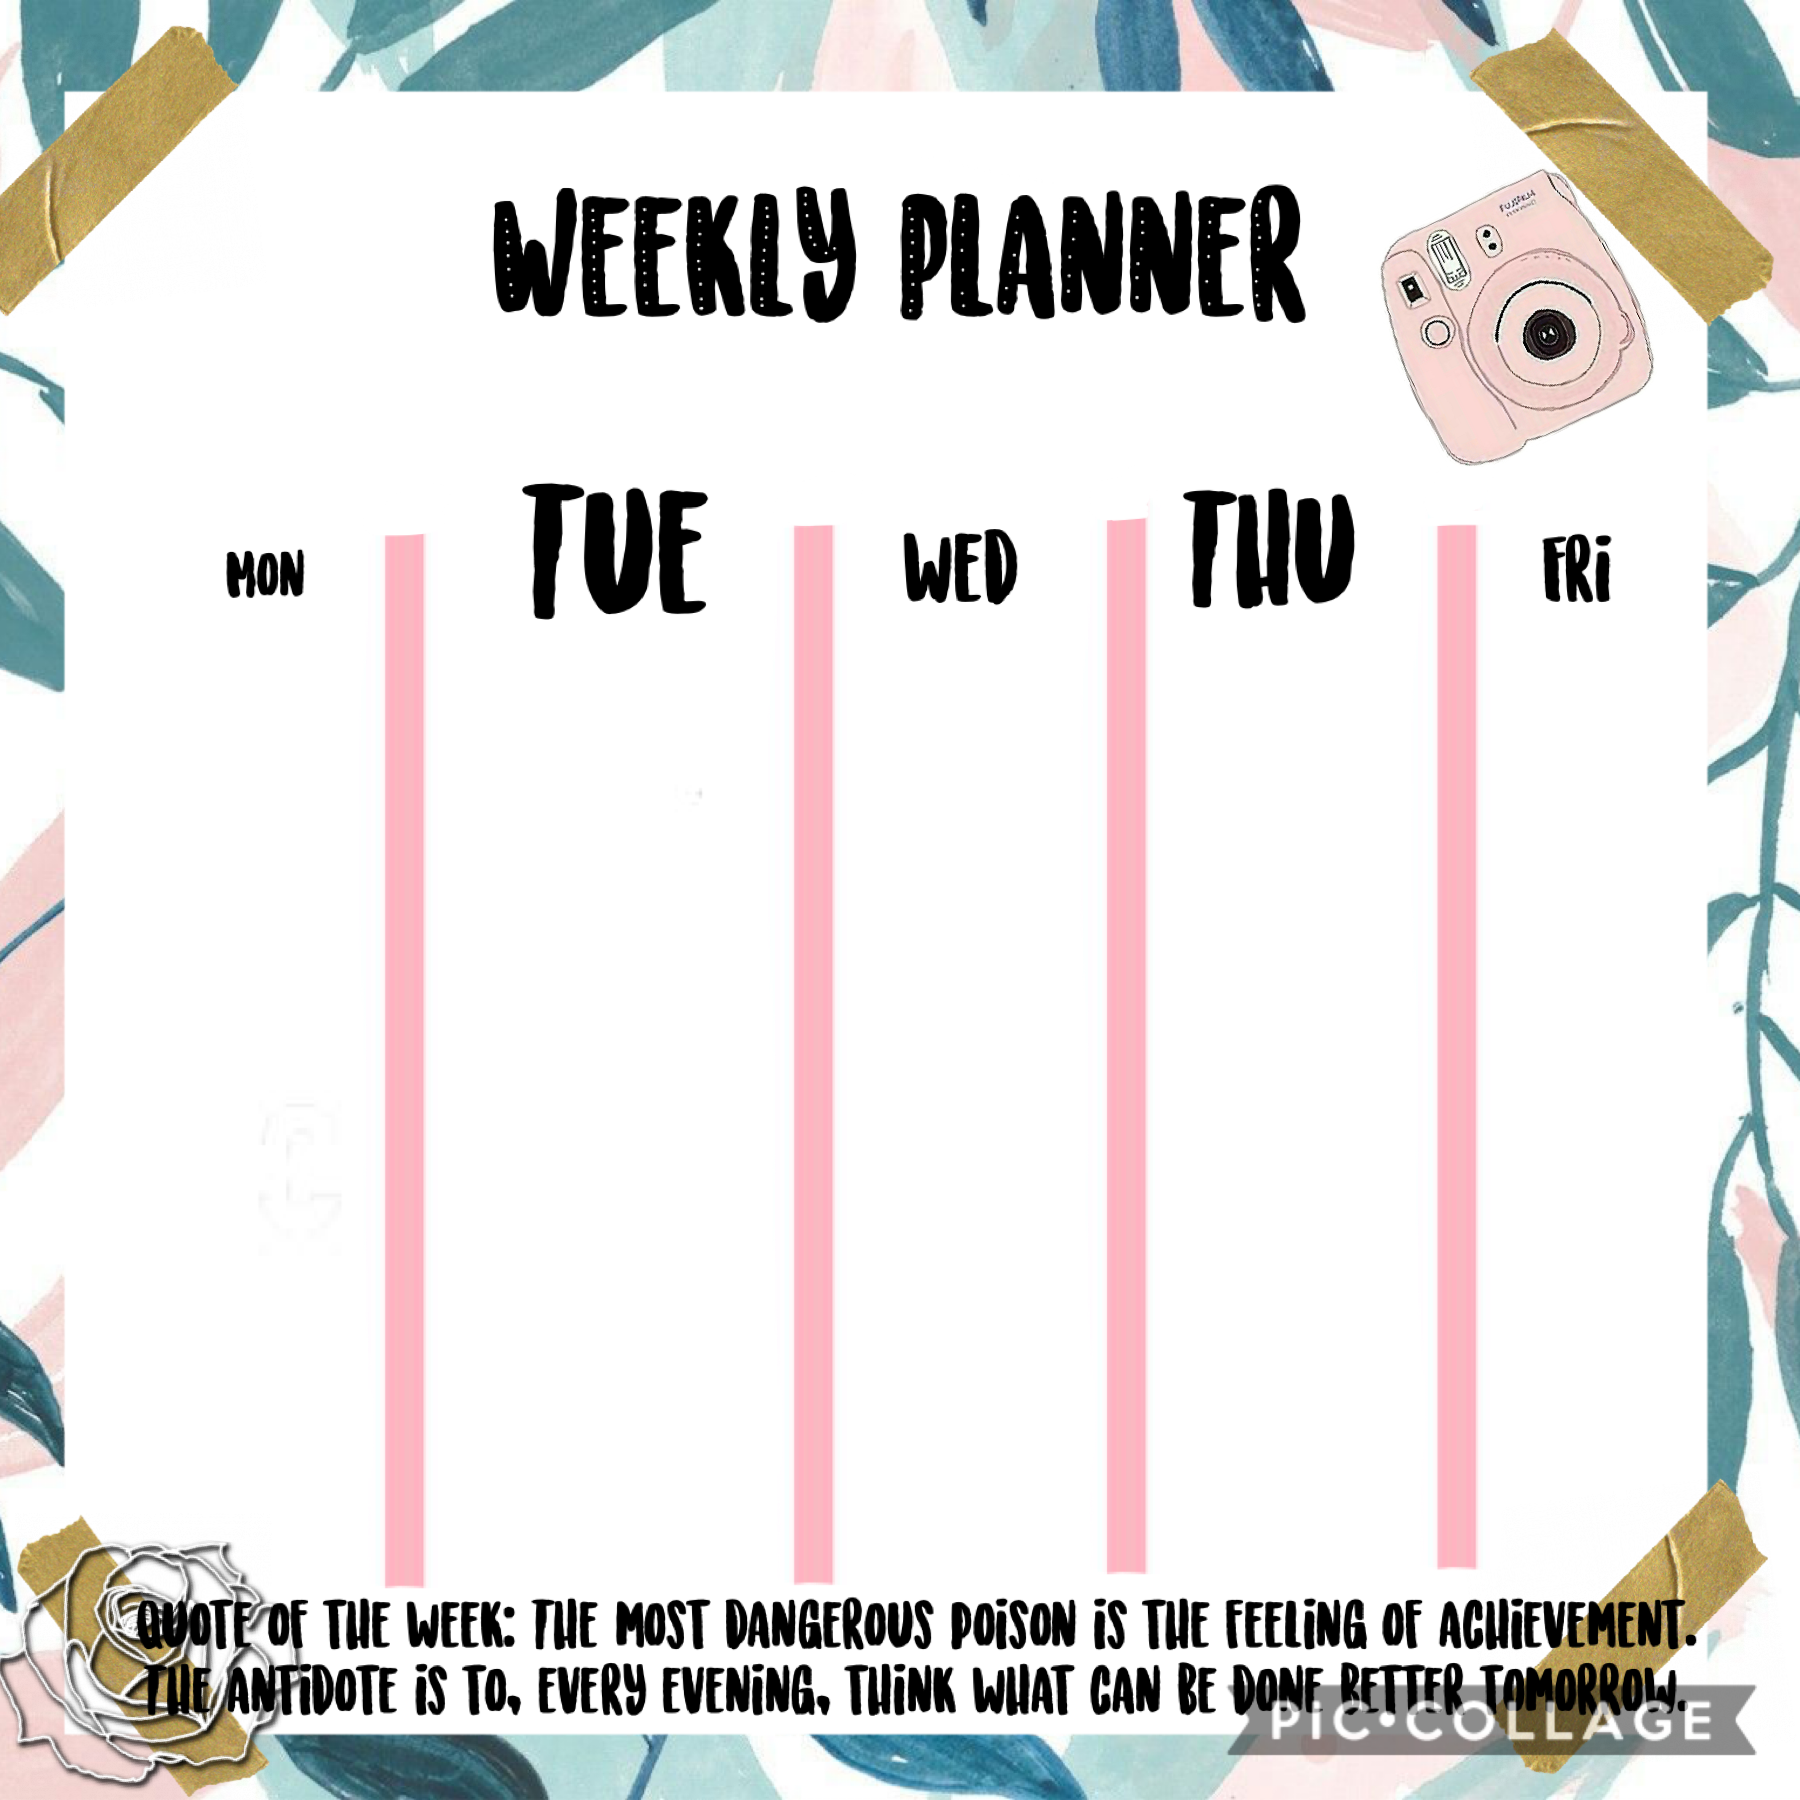 This is a weekly planner that anybody can use!